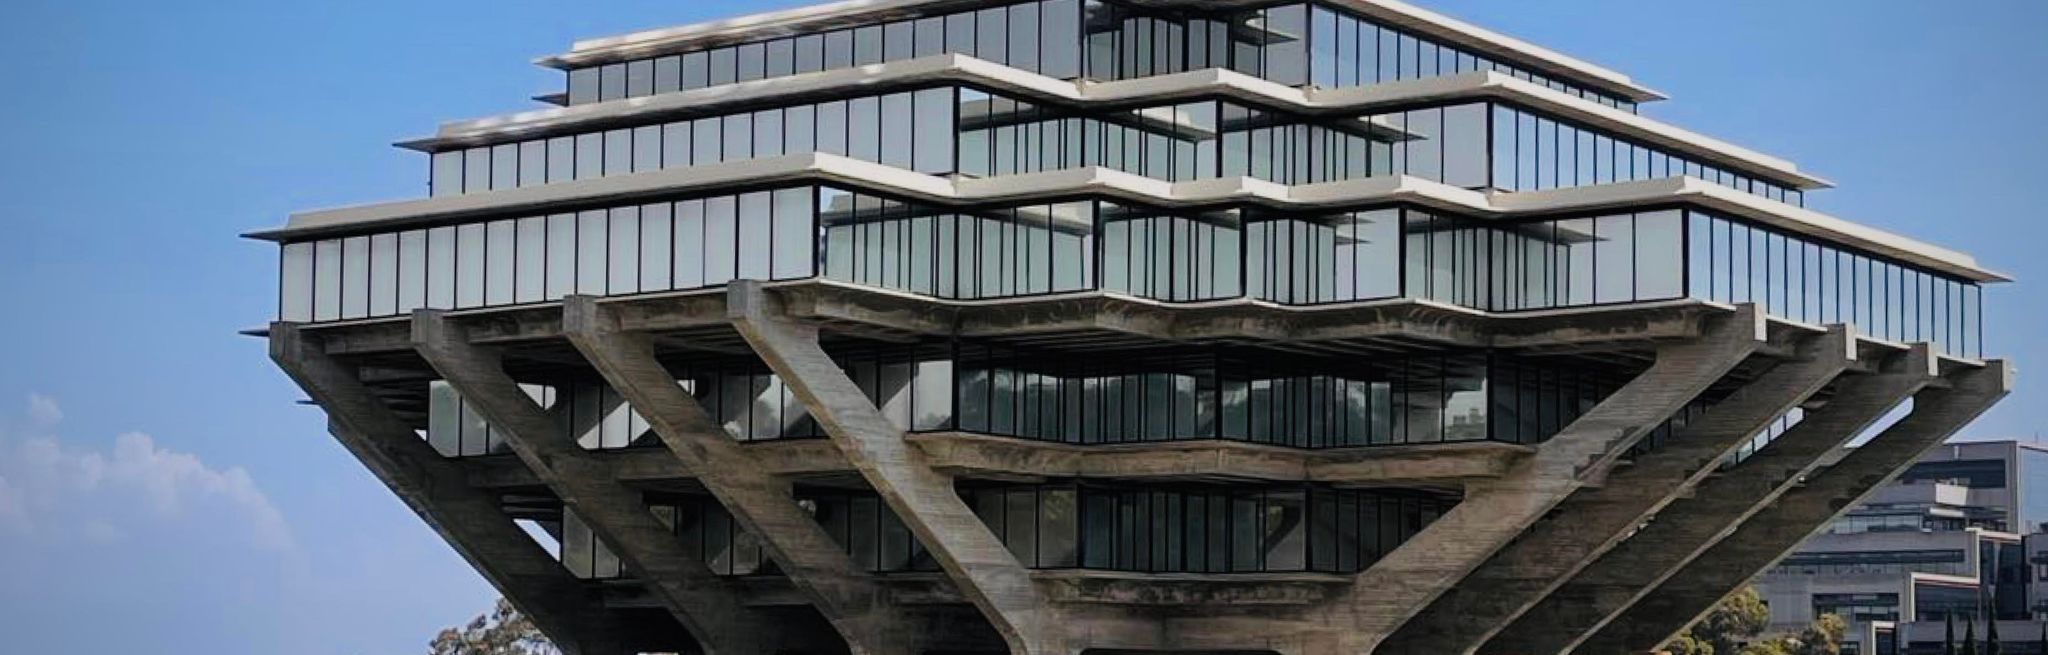 Image of Geisel Library